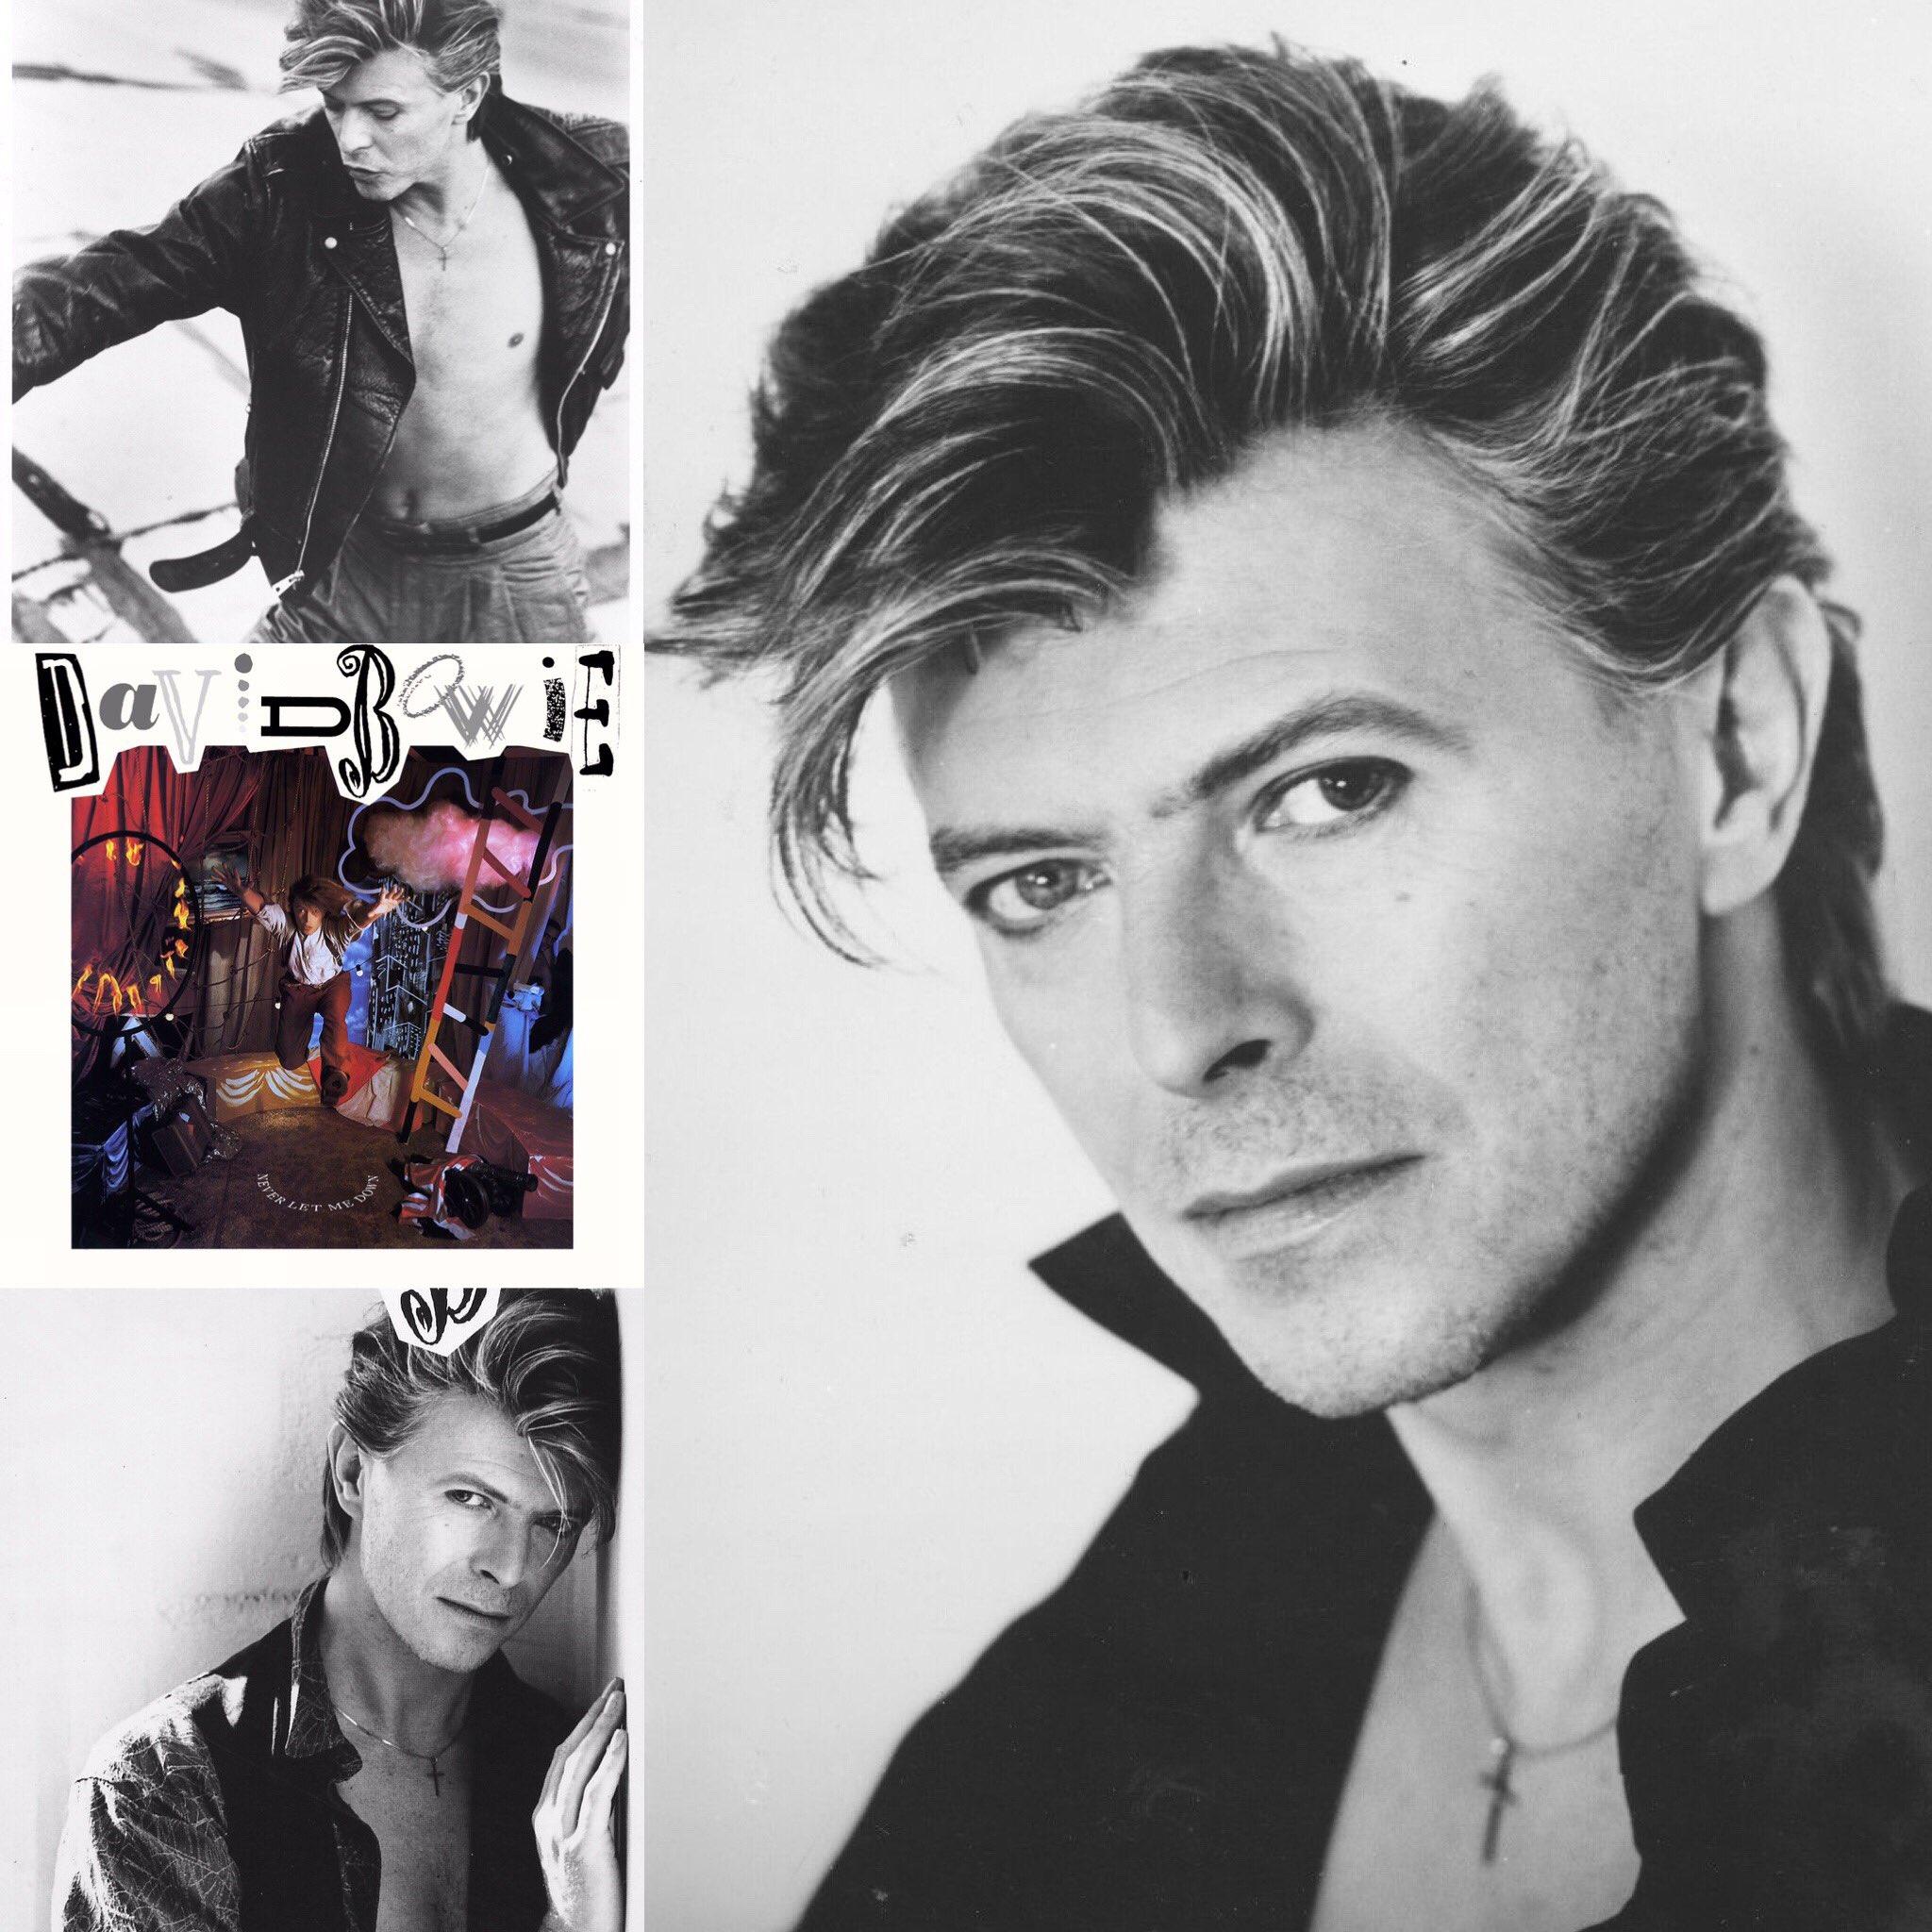 Celebrating David Bowies 13 Most Memorable Hair and Makeup Moments and His  MCA Chicago Retrospective  David bowie Bowie David